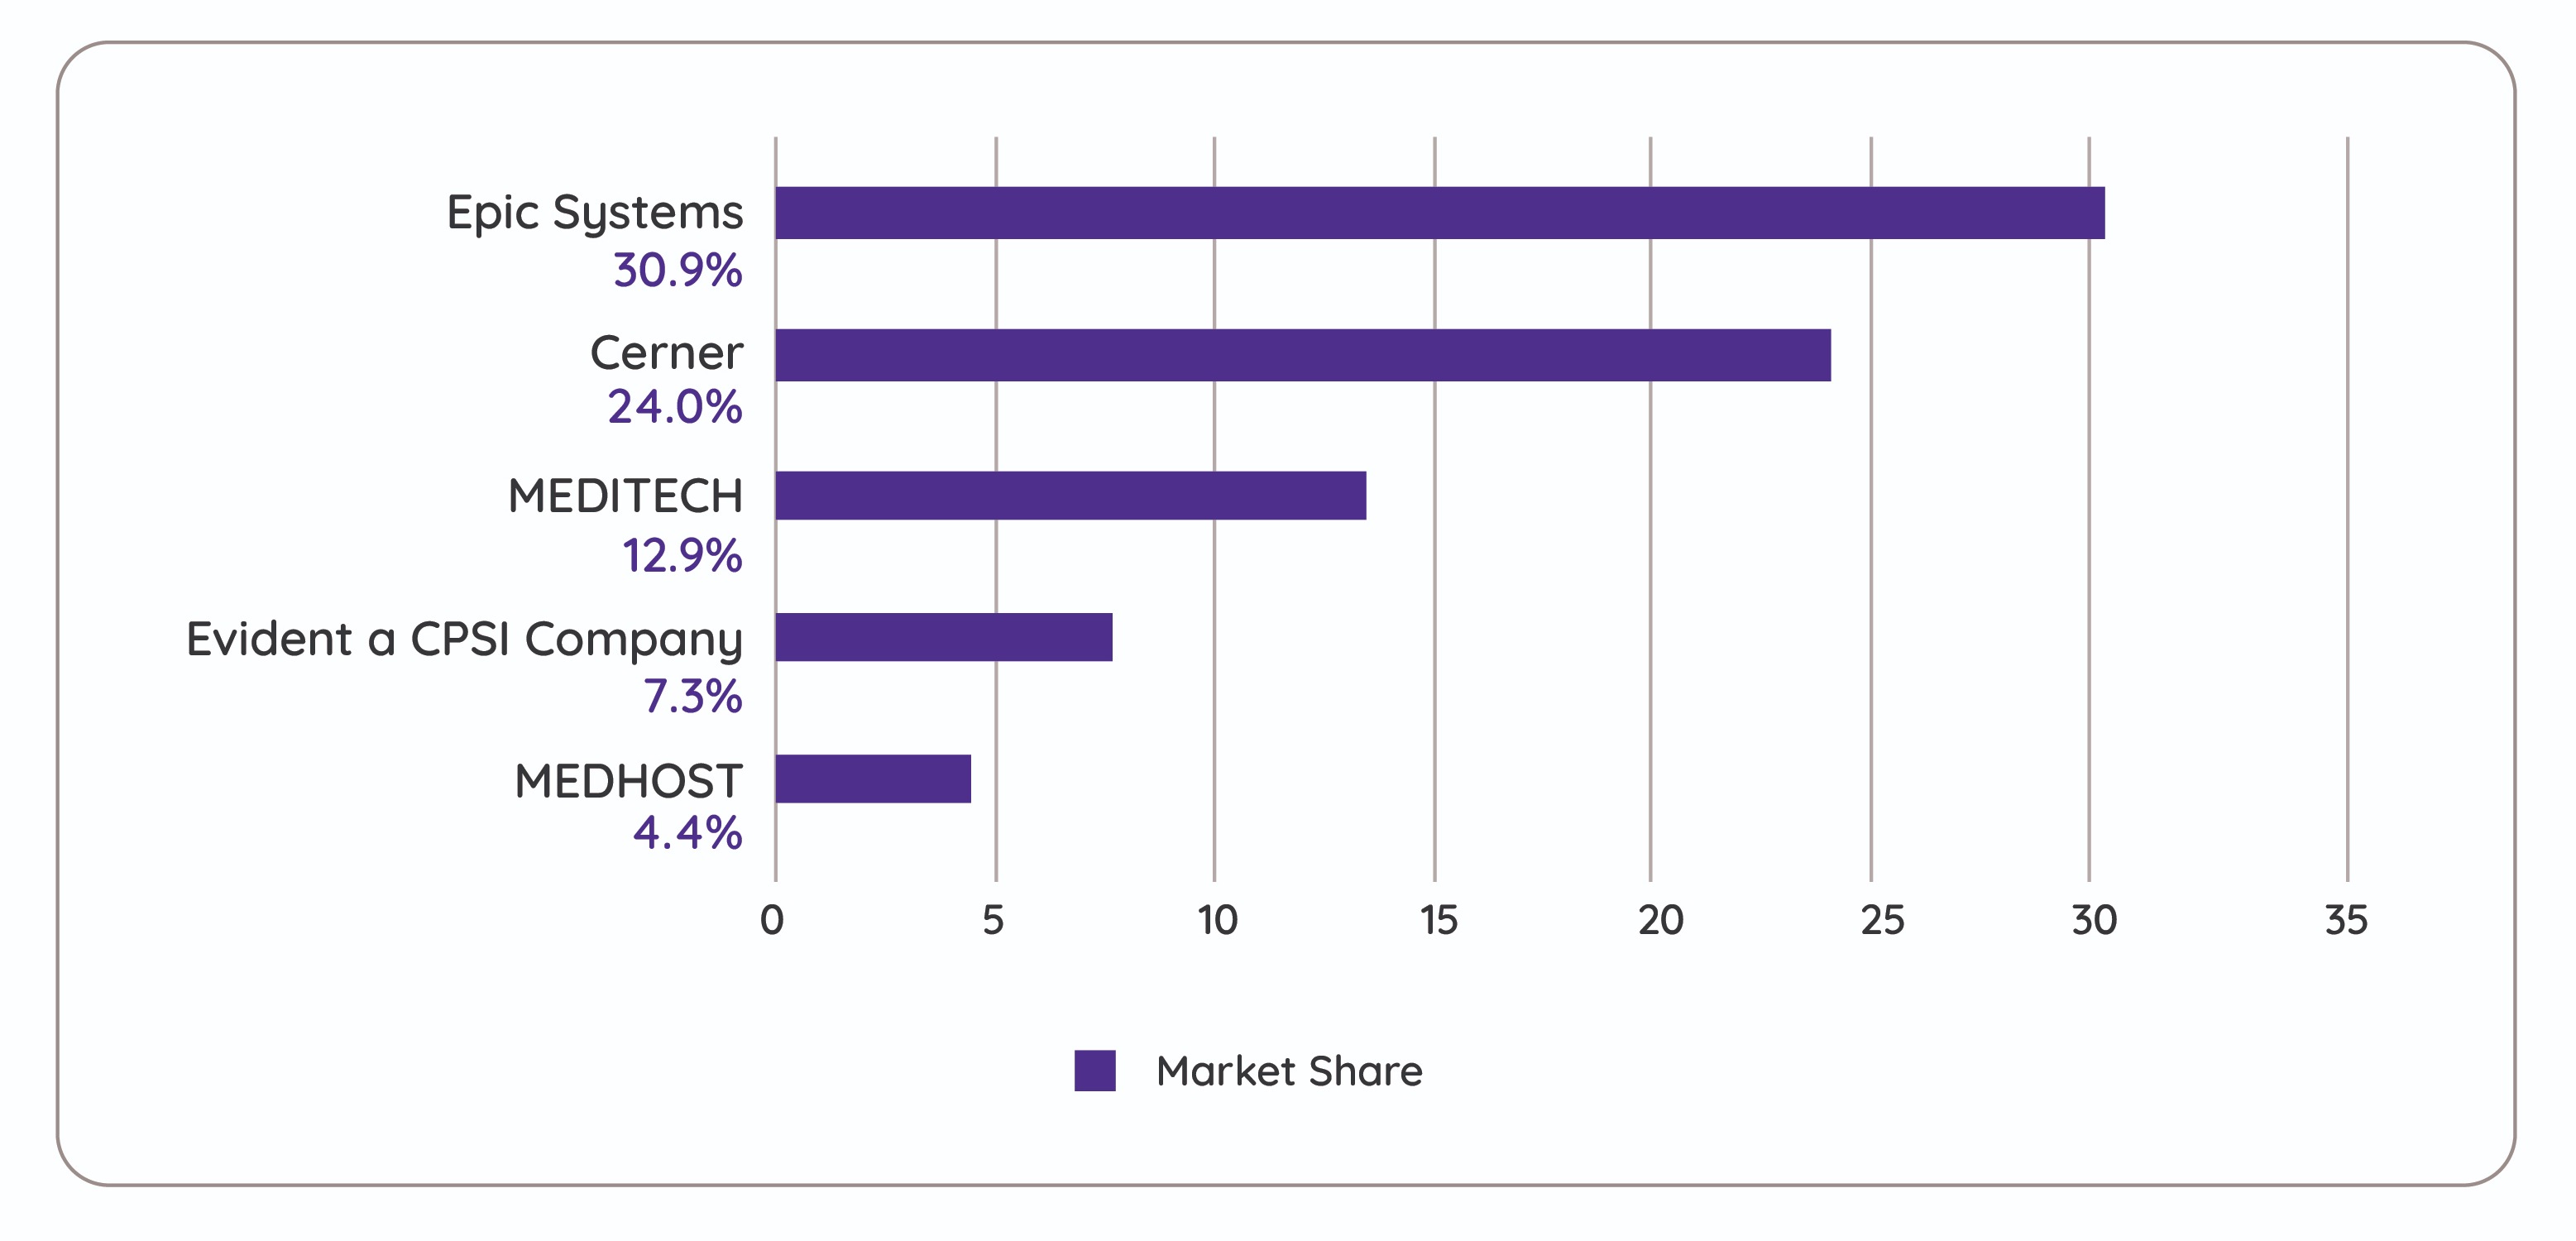 Bar graph featuring the 5 largest EHR vendors by market share